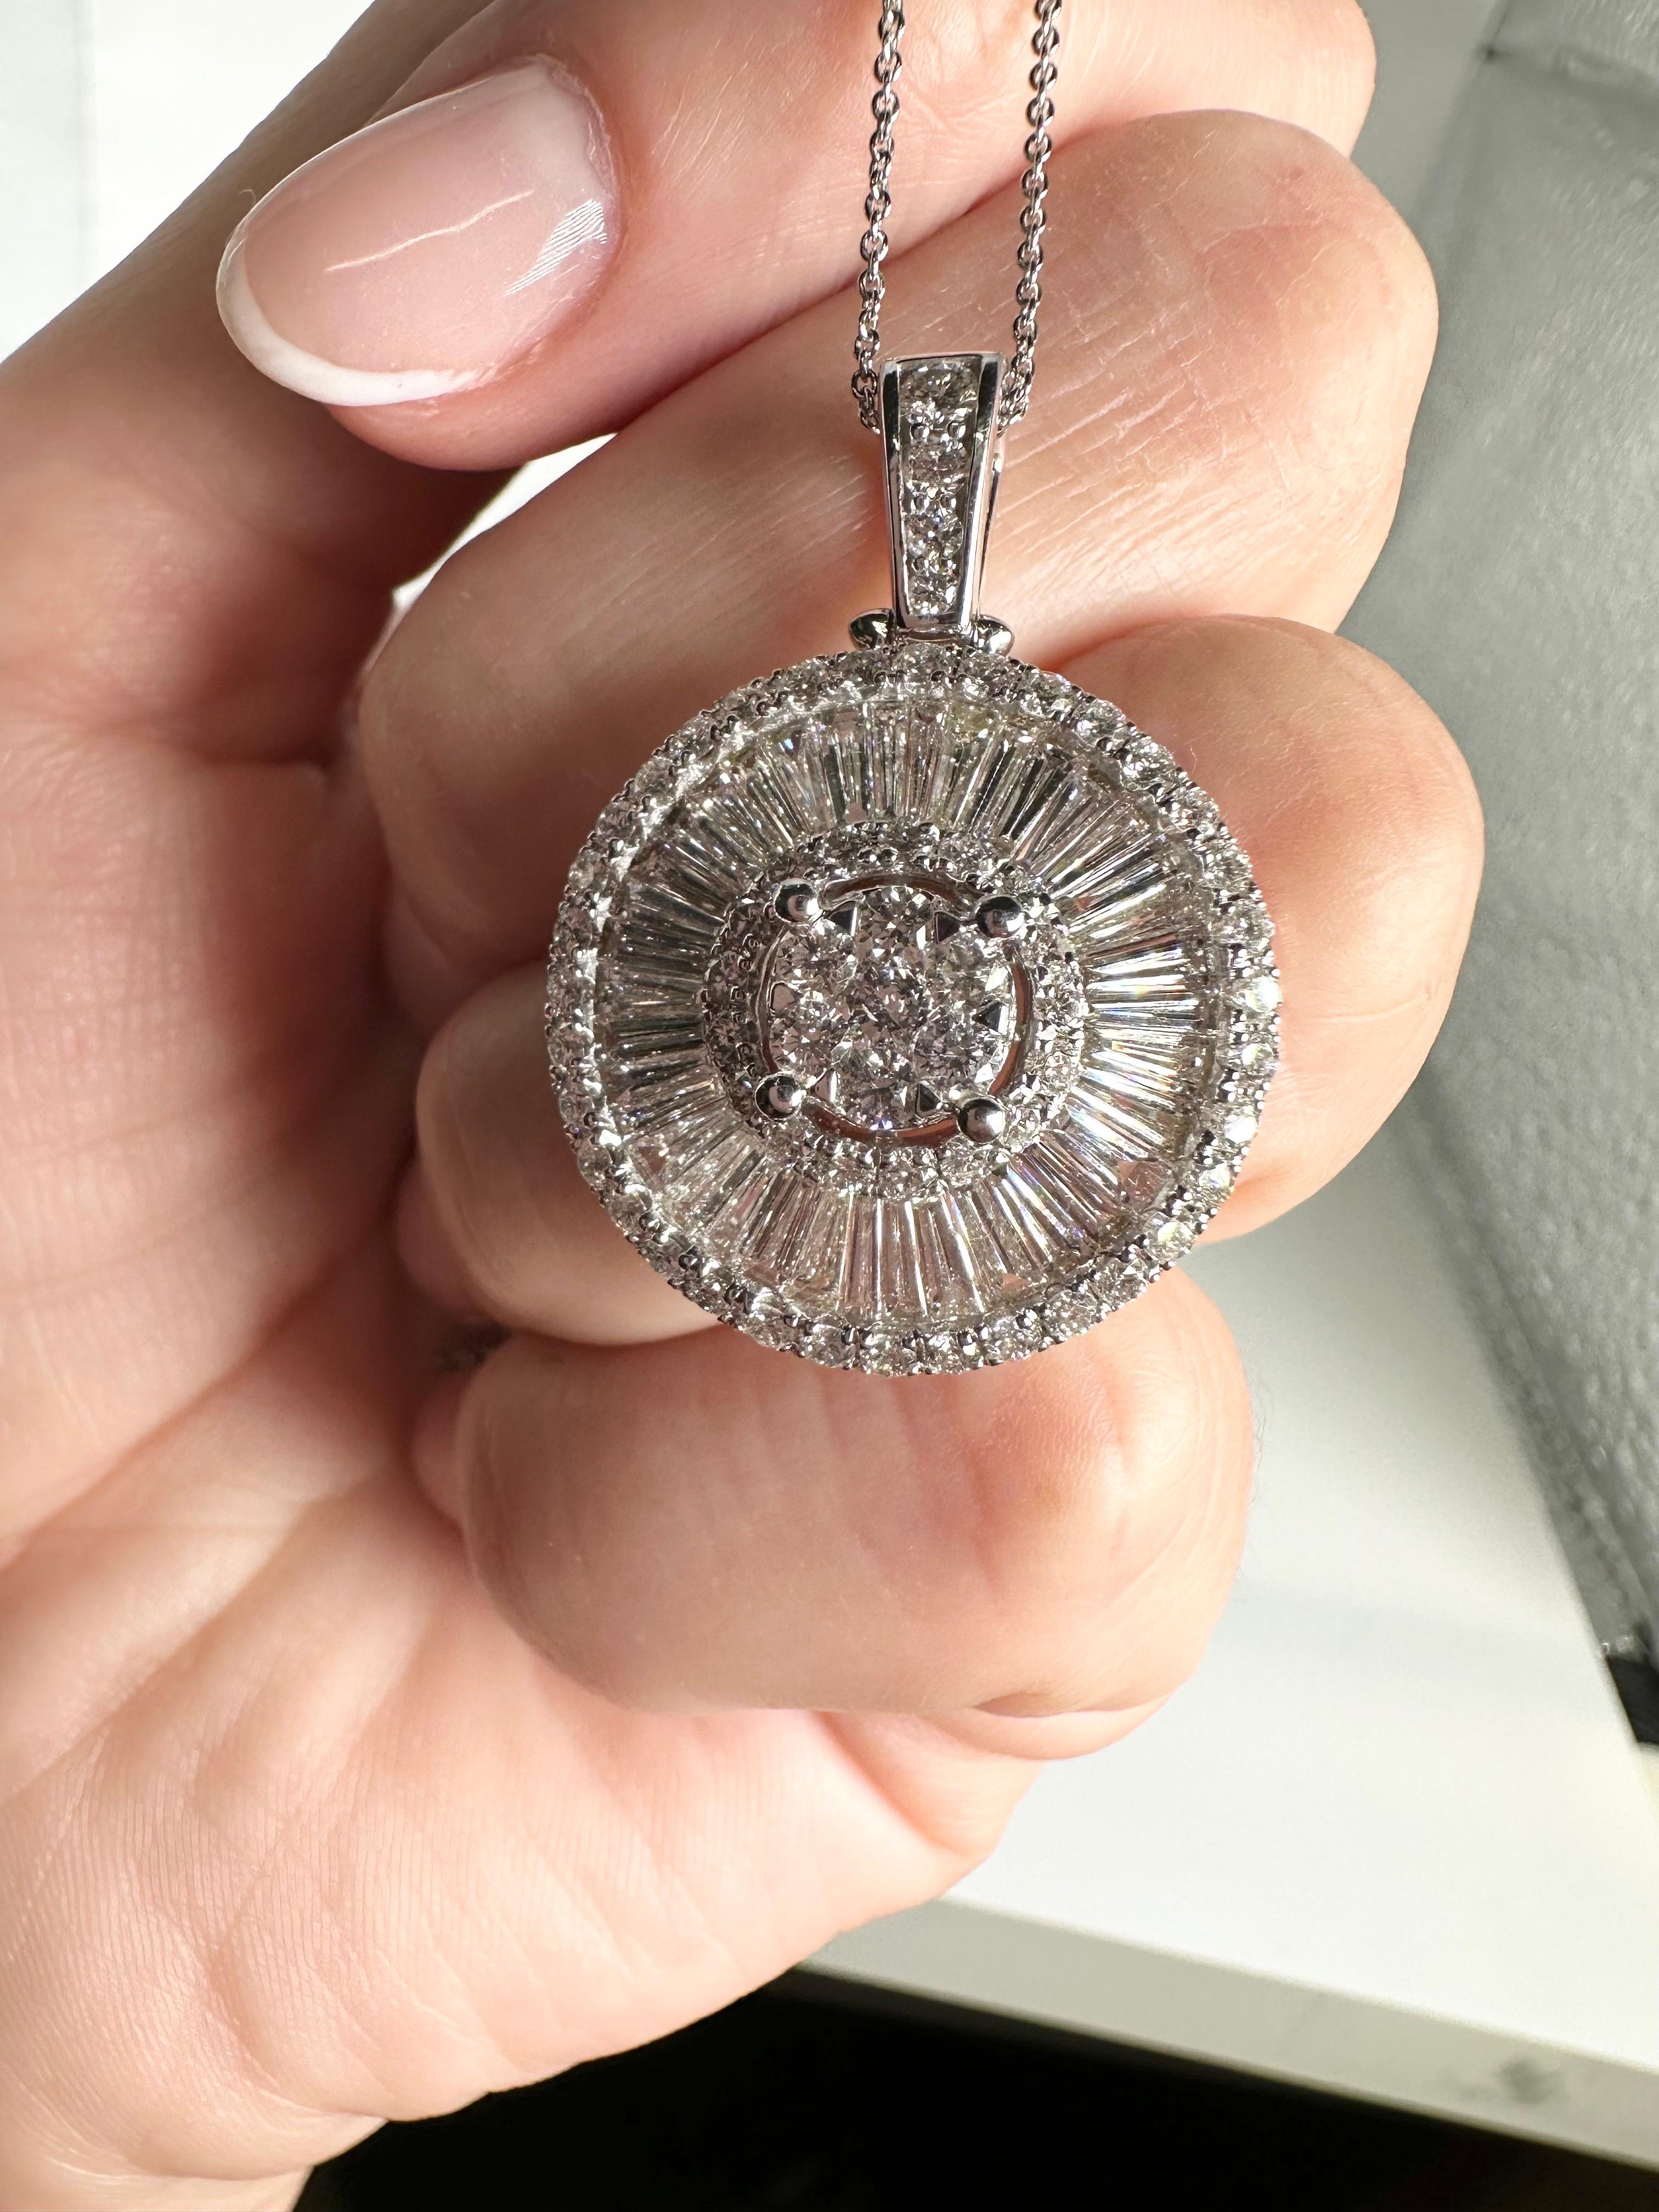 Huge diamond pendant necklace 4.96ct diamonds 14KT gold round compass pendant In New Condition For Sale In Jupiter, FL